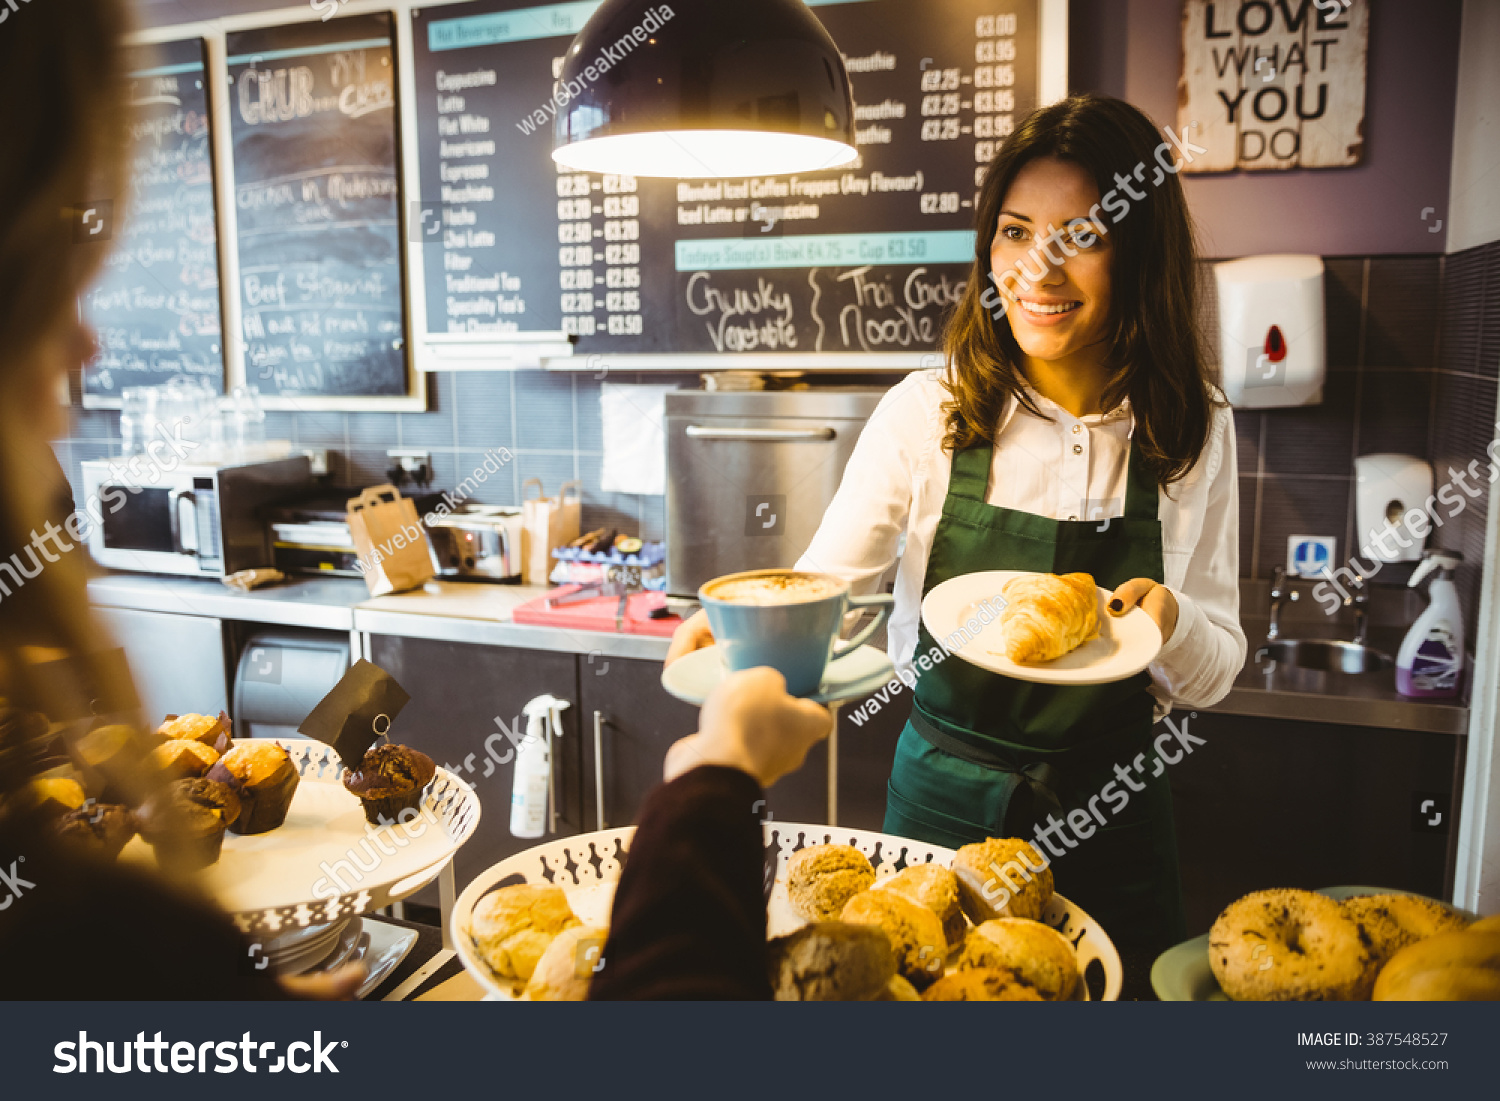 Waitress serving a cup of coffee in cafe #387548527